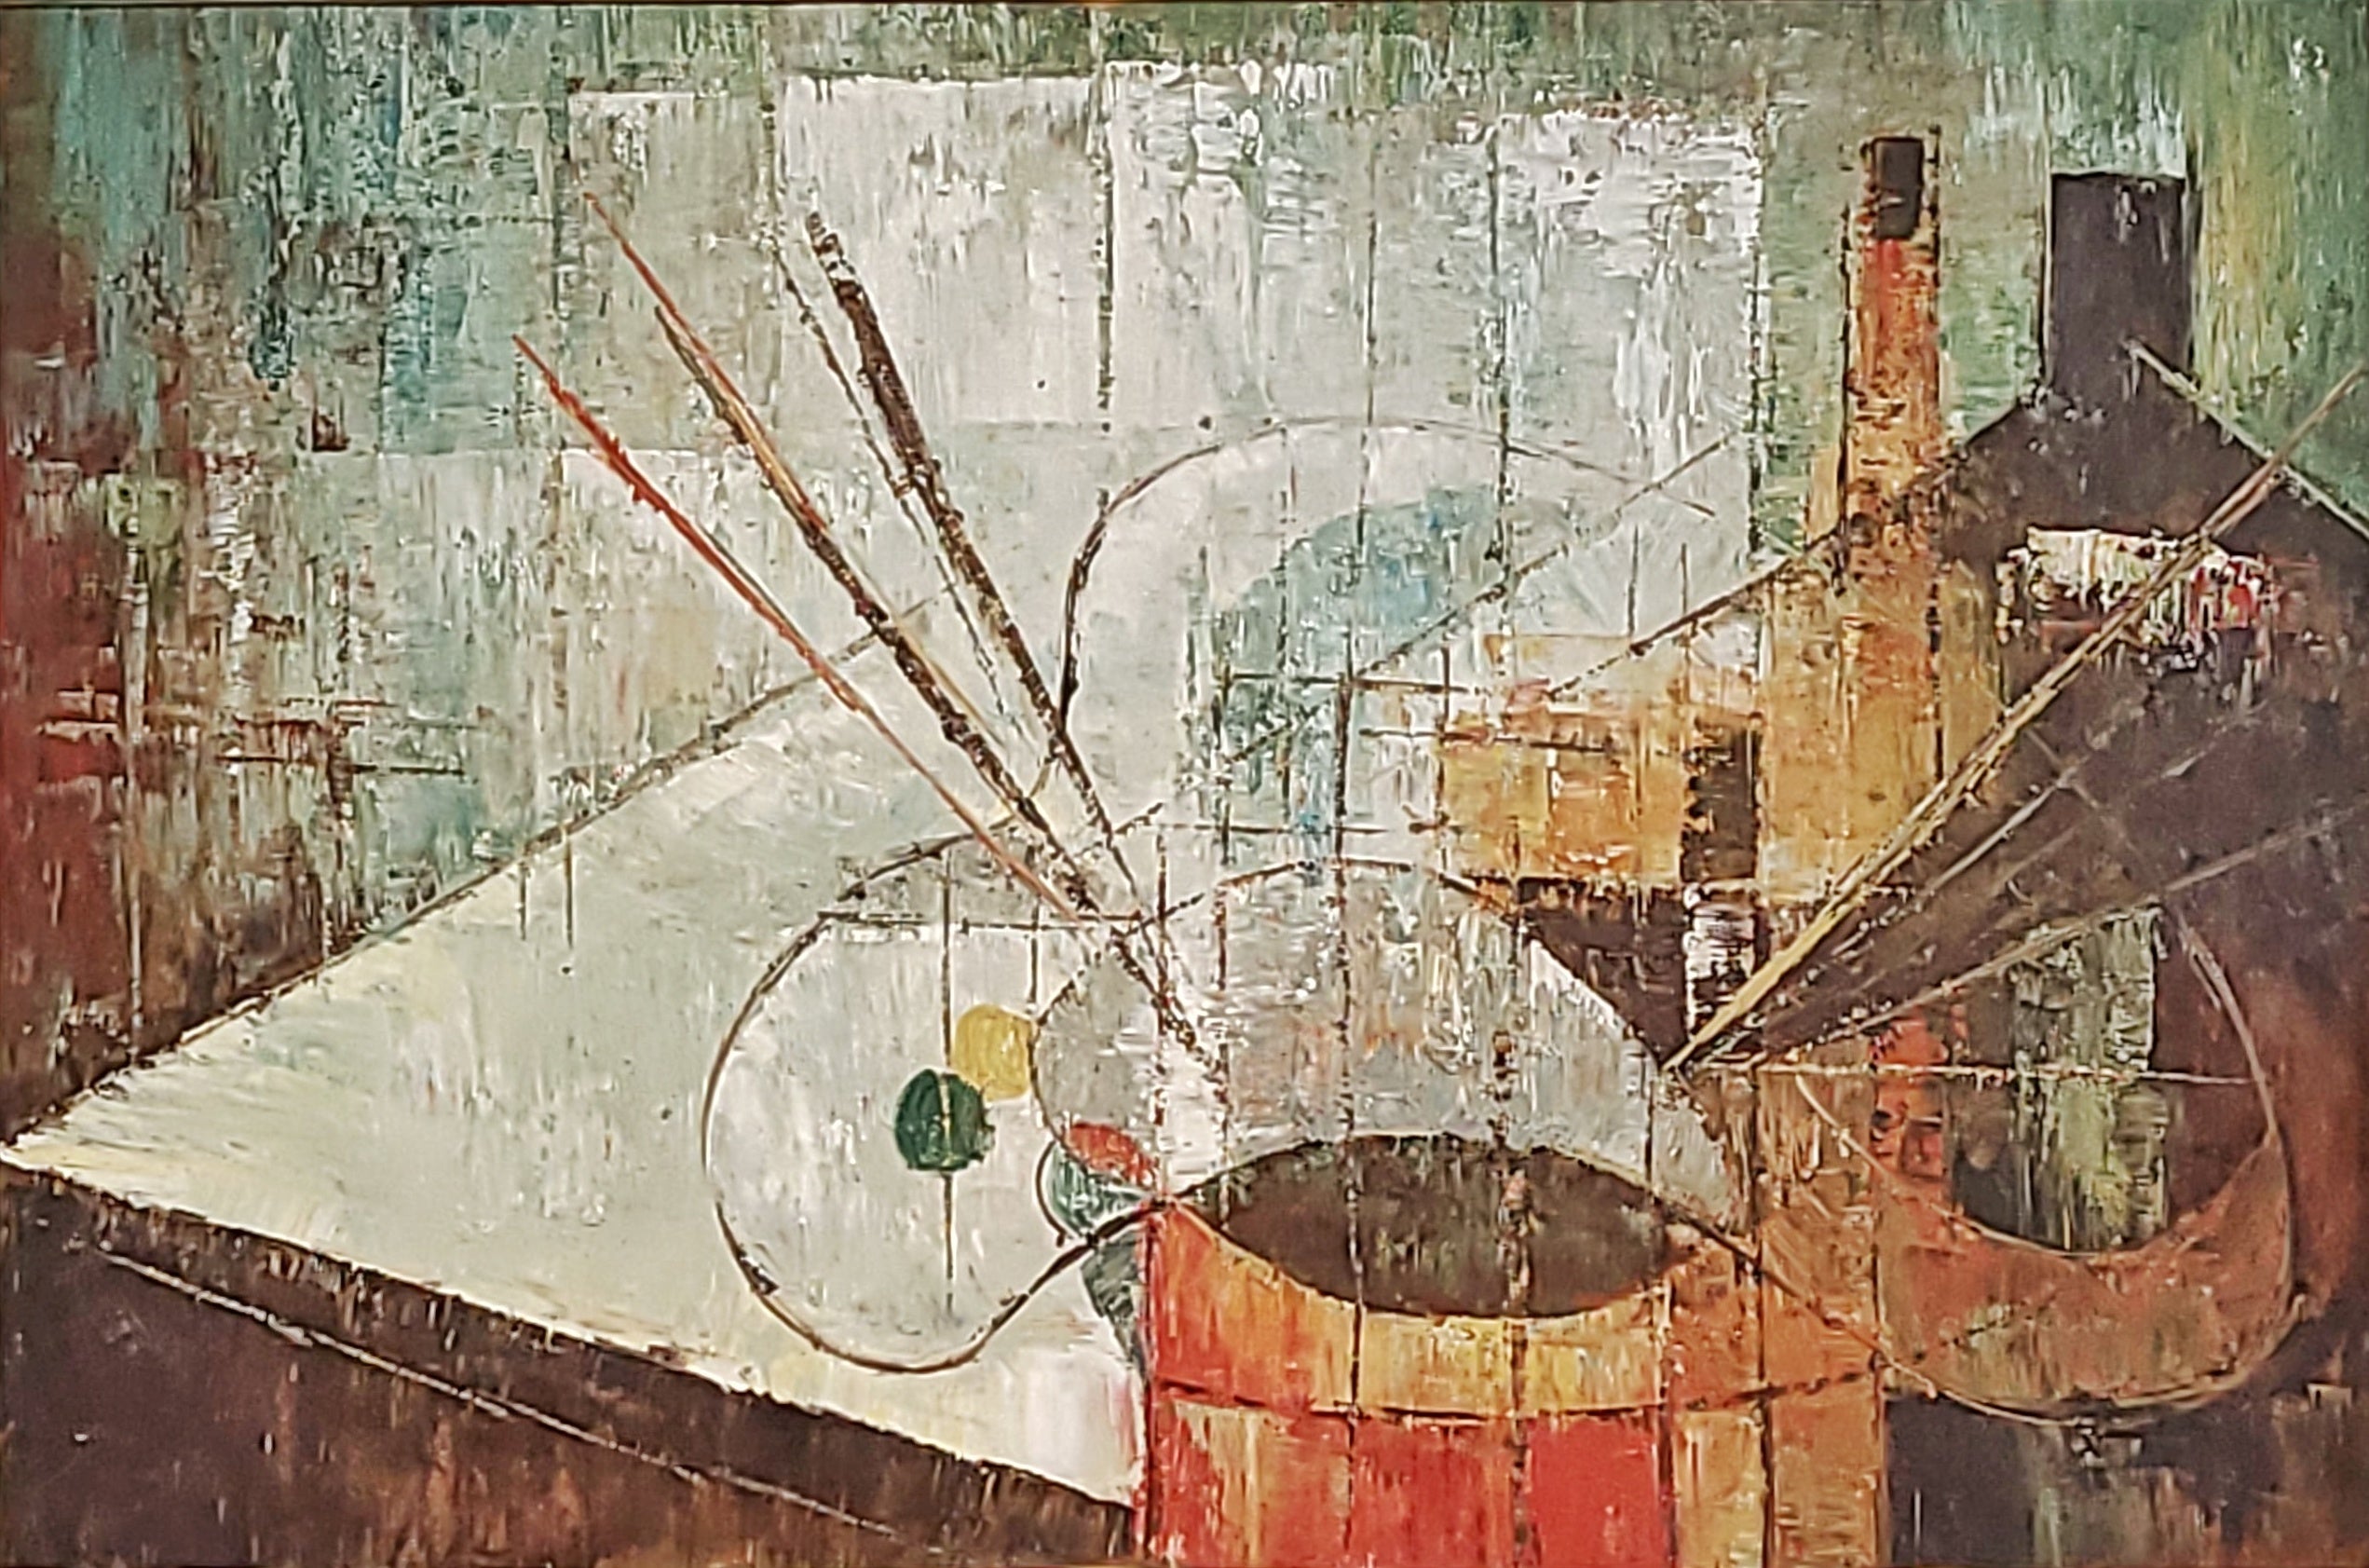 STILL LIFE WITH ARTIST'S TOOLS - OIL ON CANVAS BY UNKNOWN ARTIST (2000s)